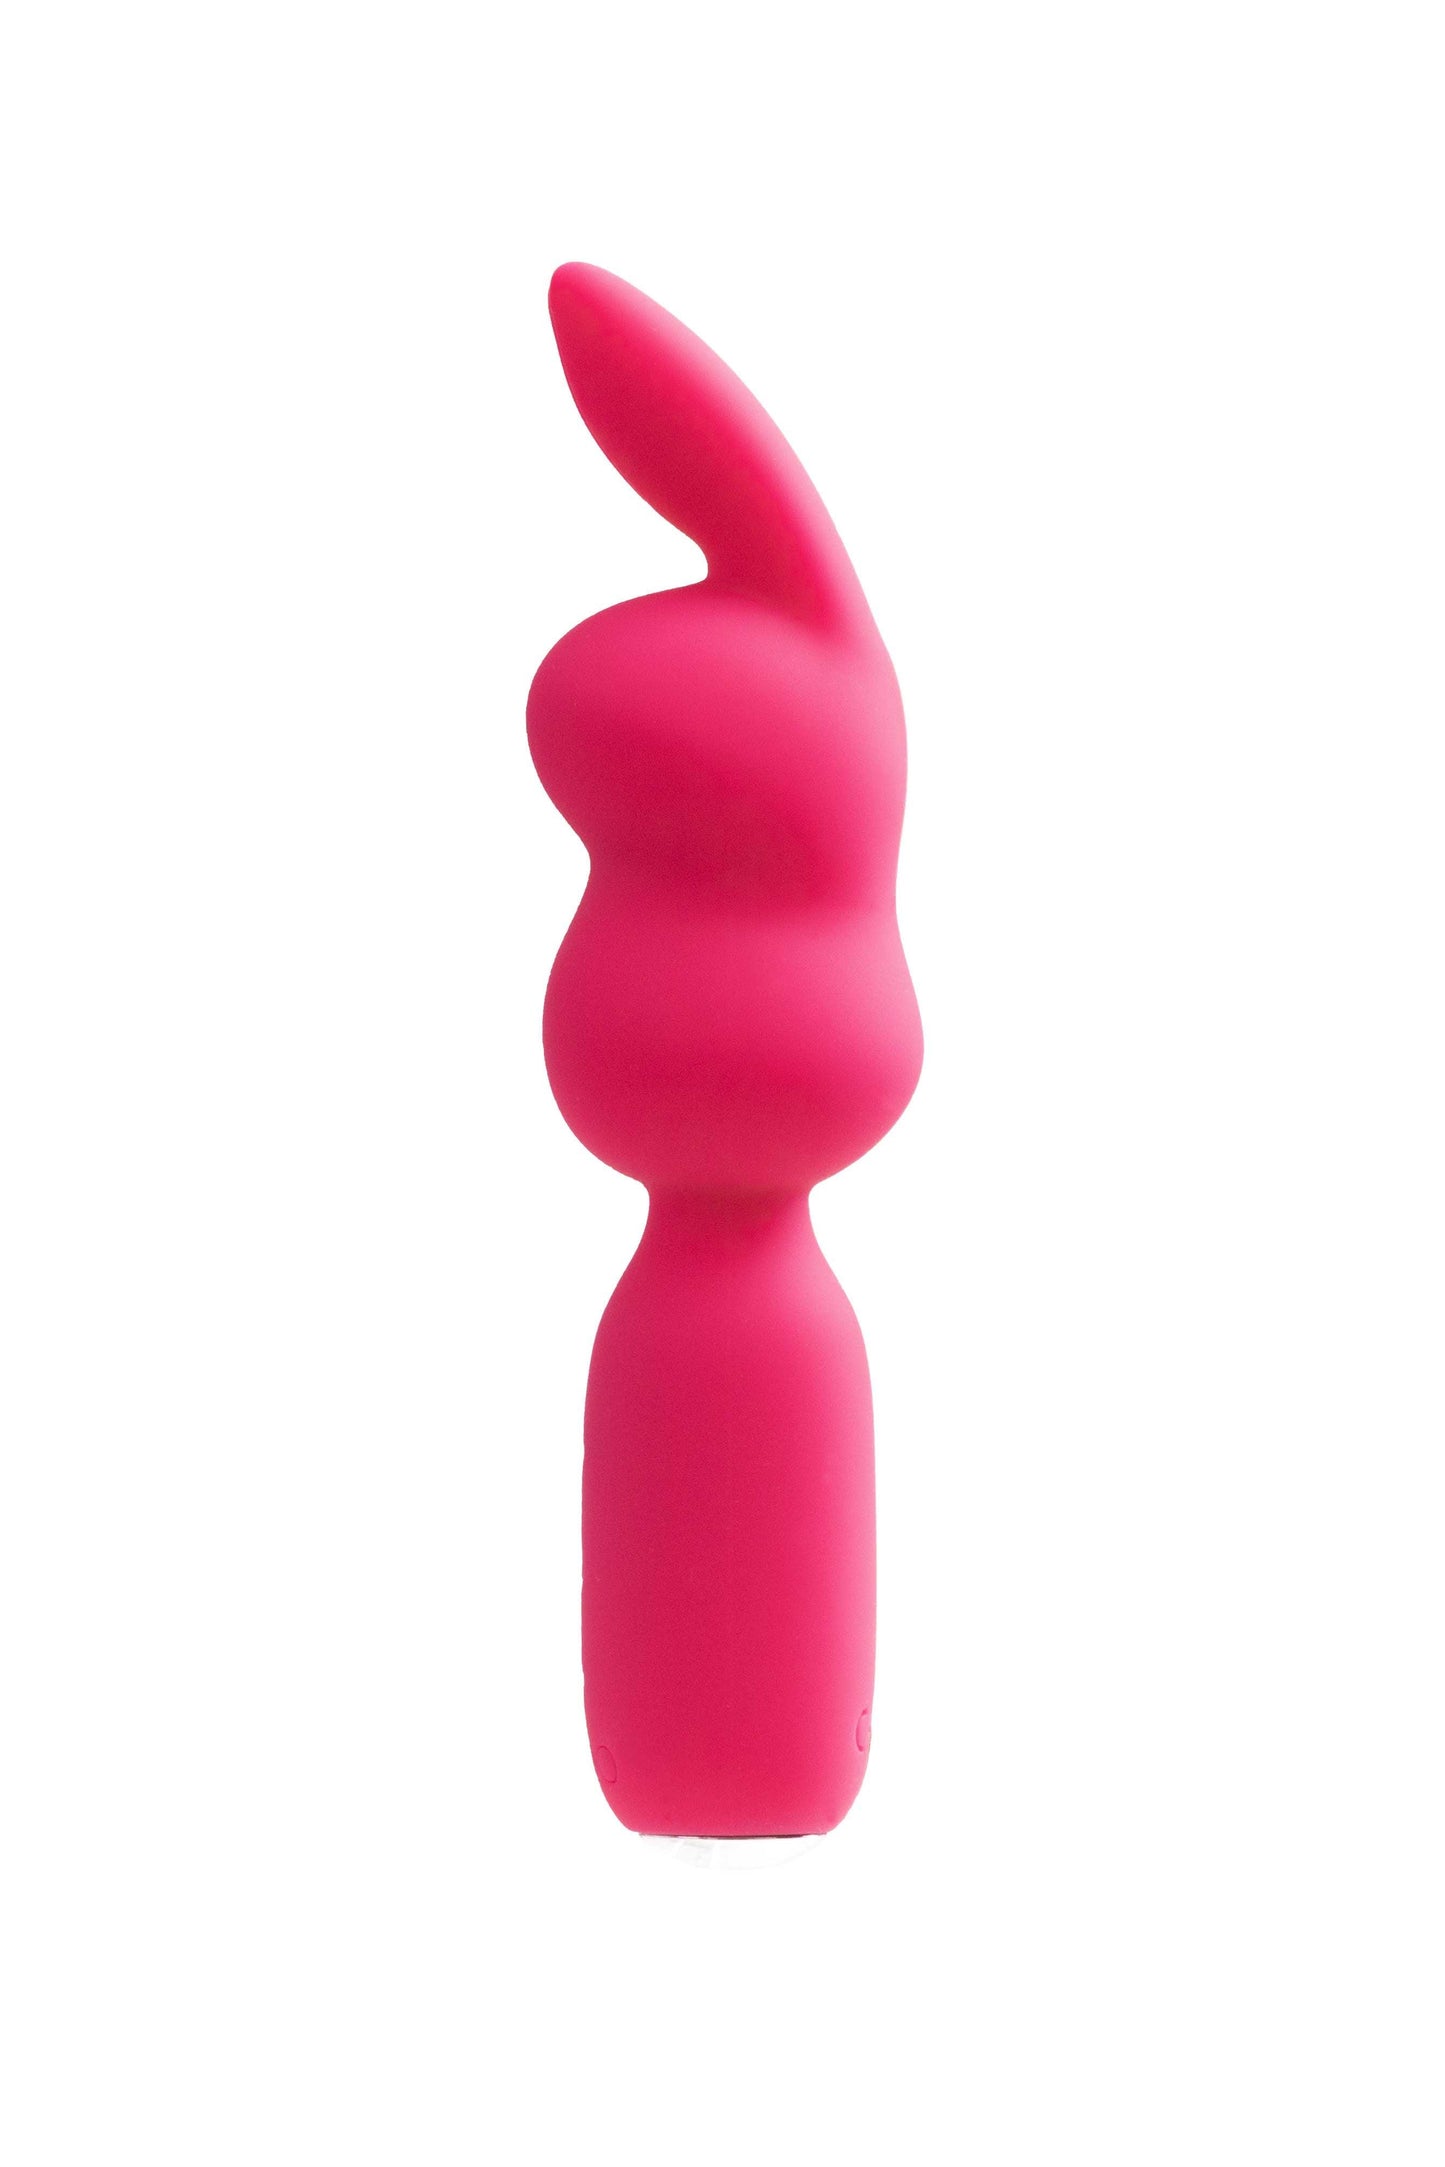 Hopper Bunny Rechargeable Mini Wand - Pretty in Pink - My Sex Toy Hub